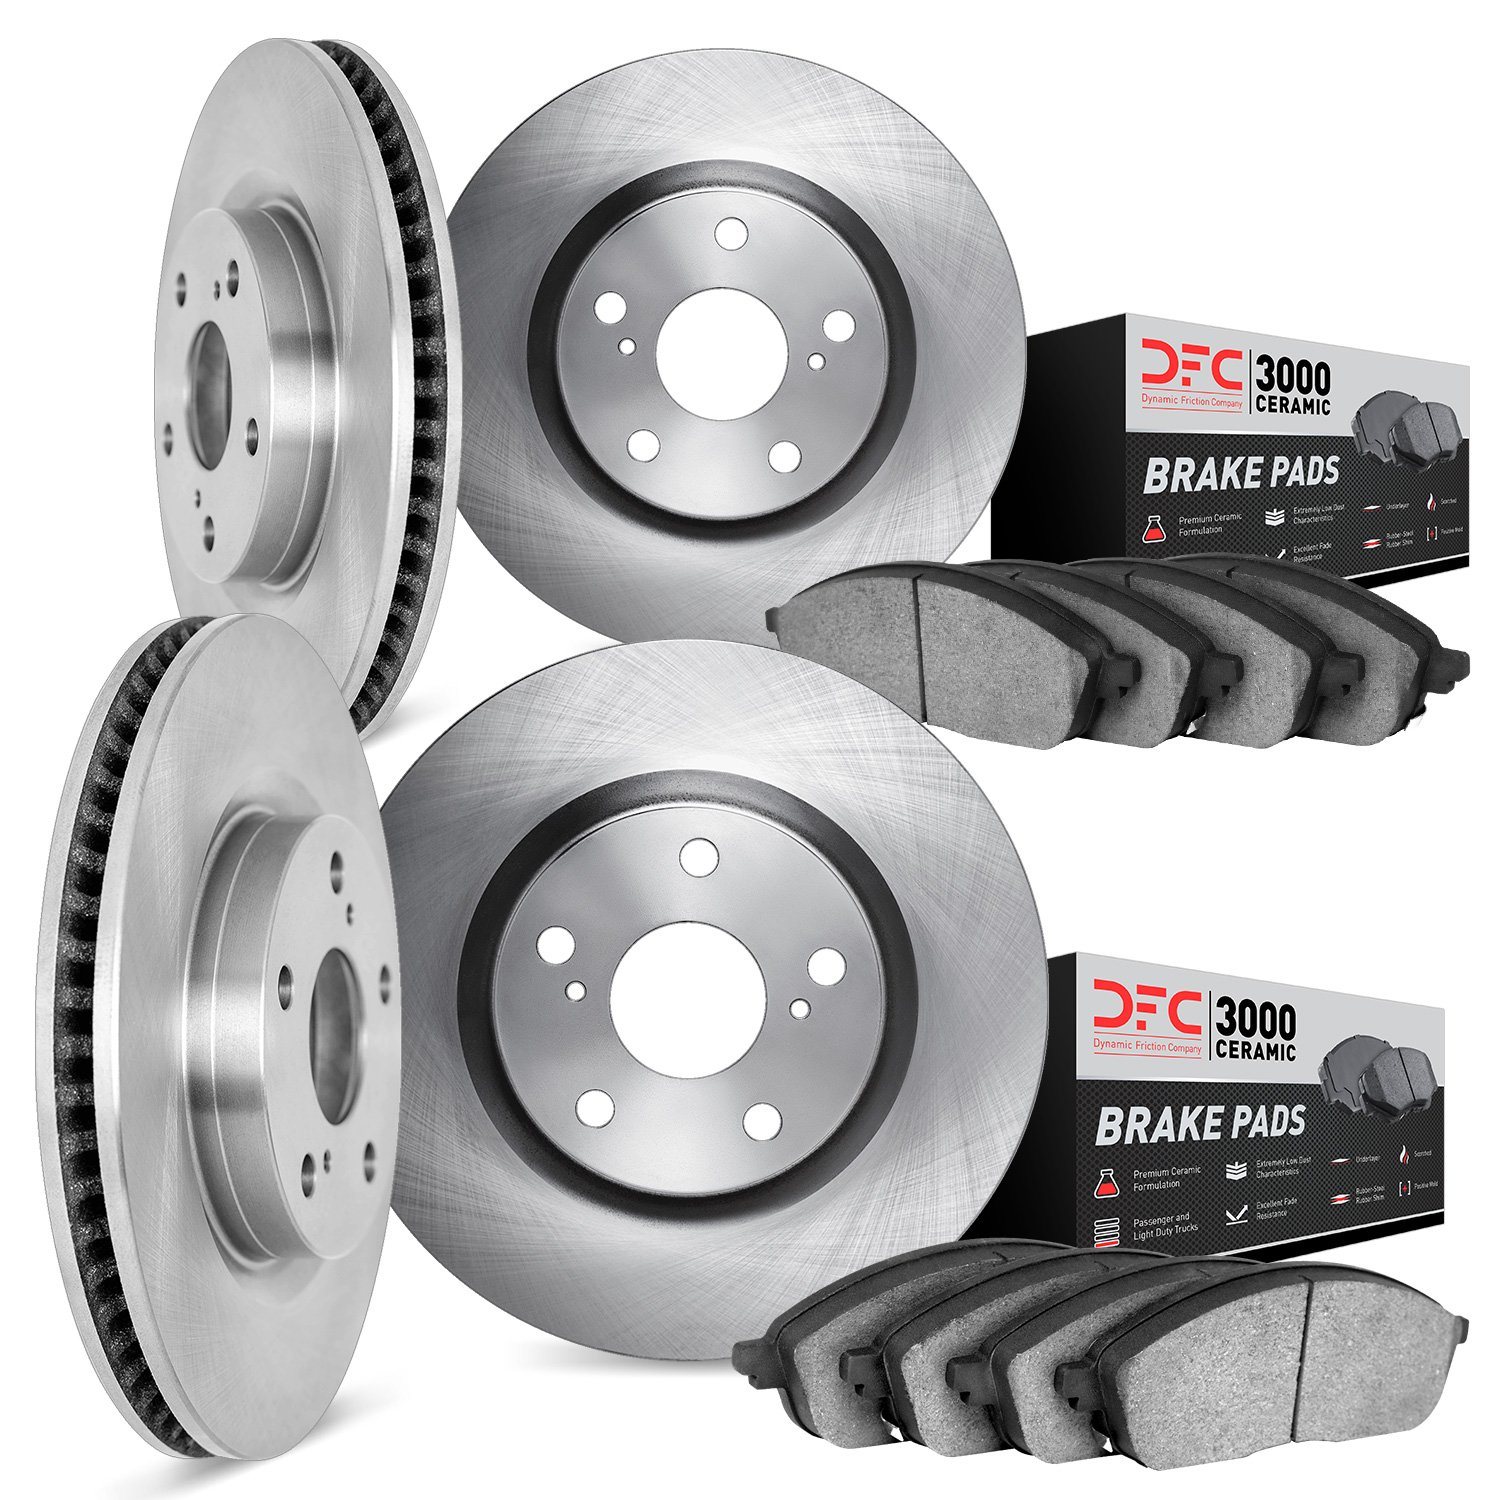 6304-76029 Brake Rotors with 3000-Series Ceramic Brake Pads Kit, 1991-1991 Lexus/Toyota/Scion, Position: Front and Rear